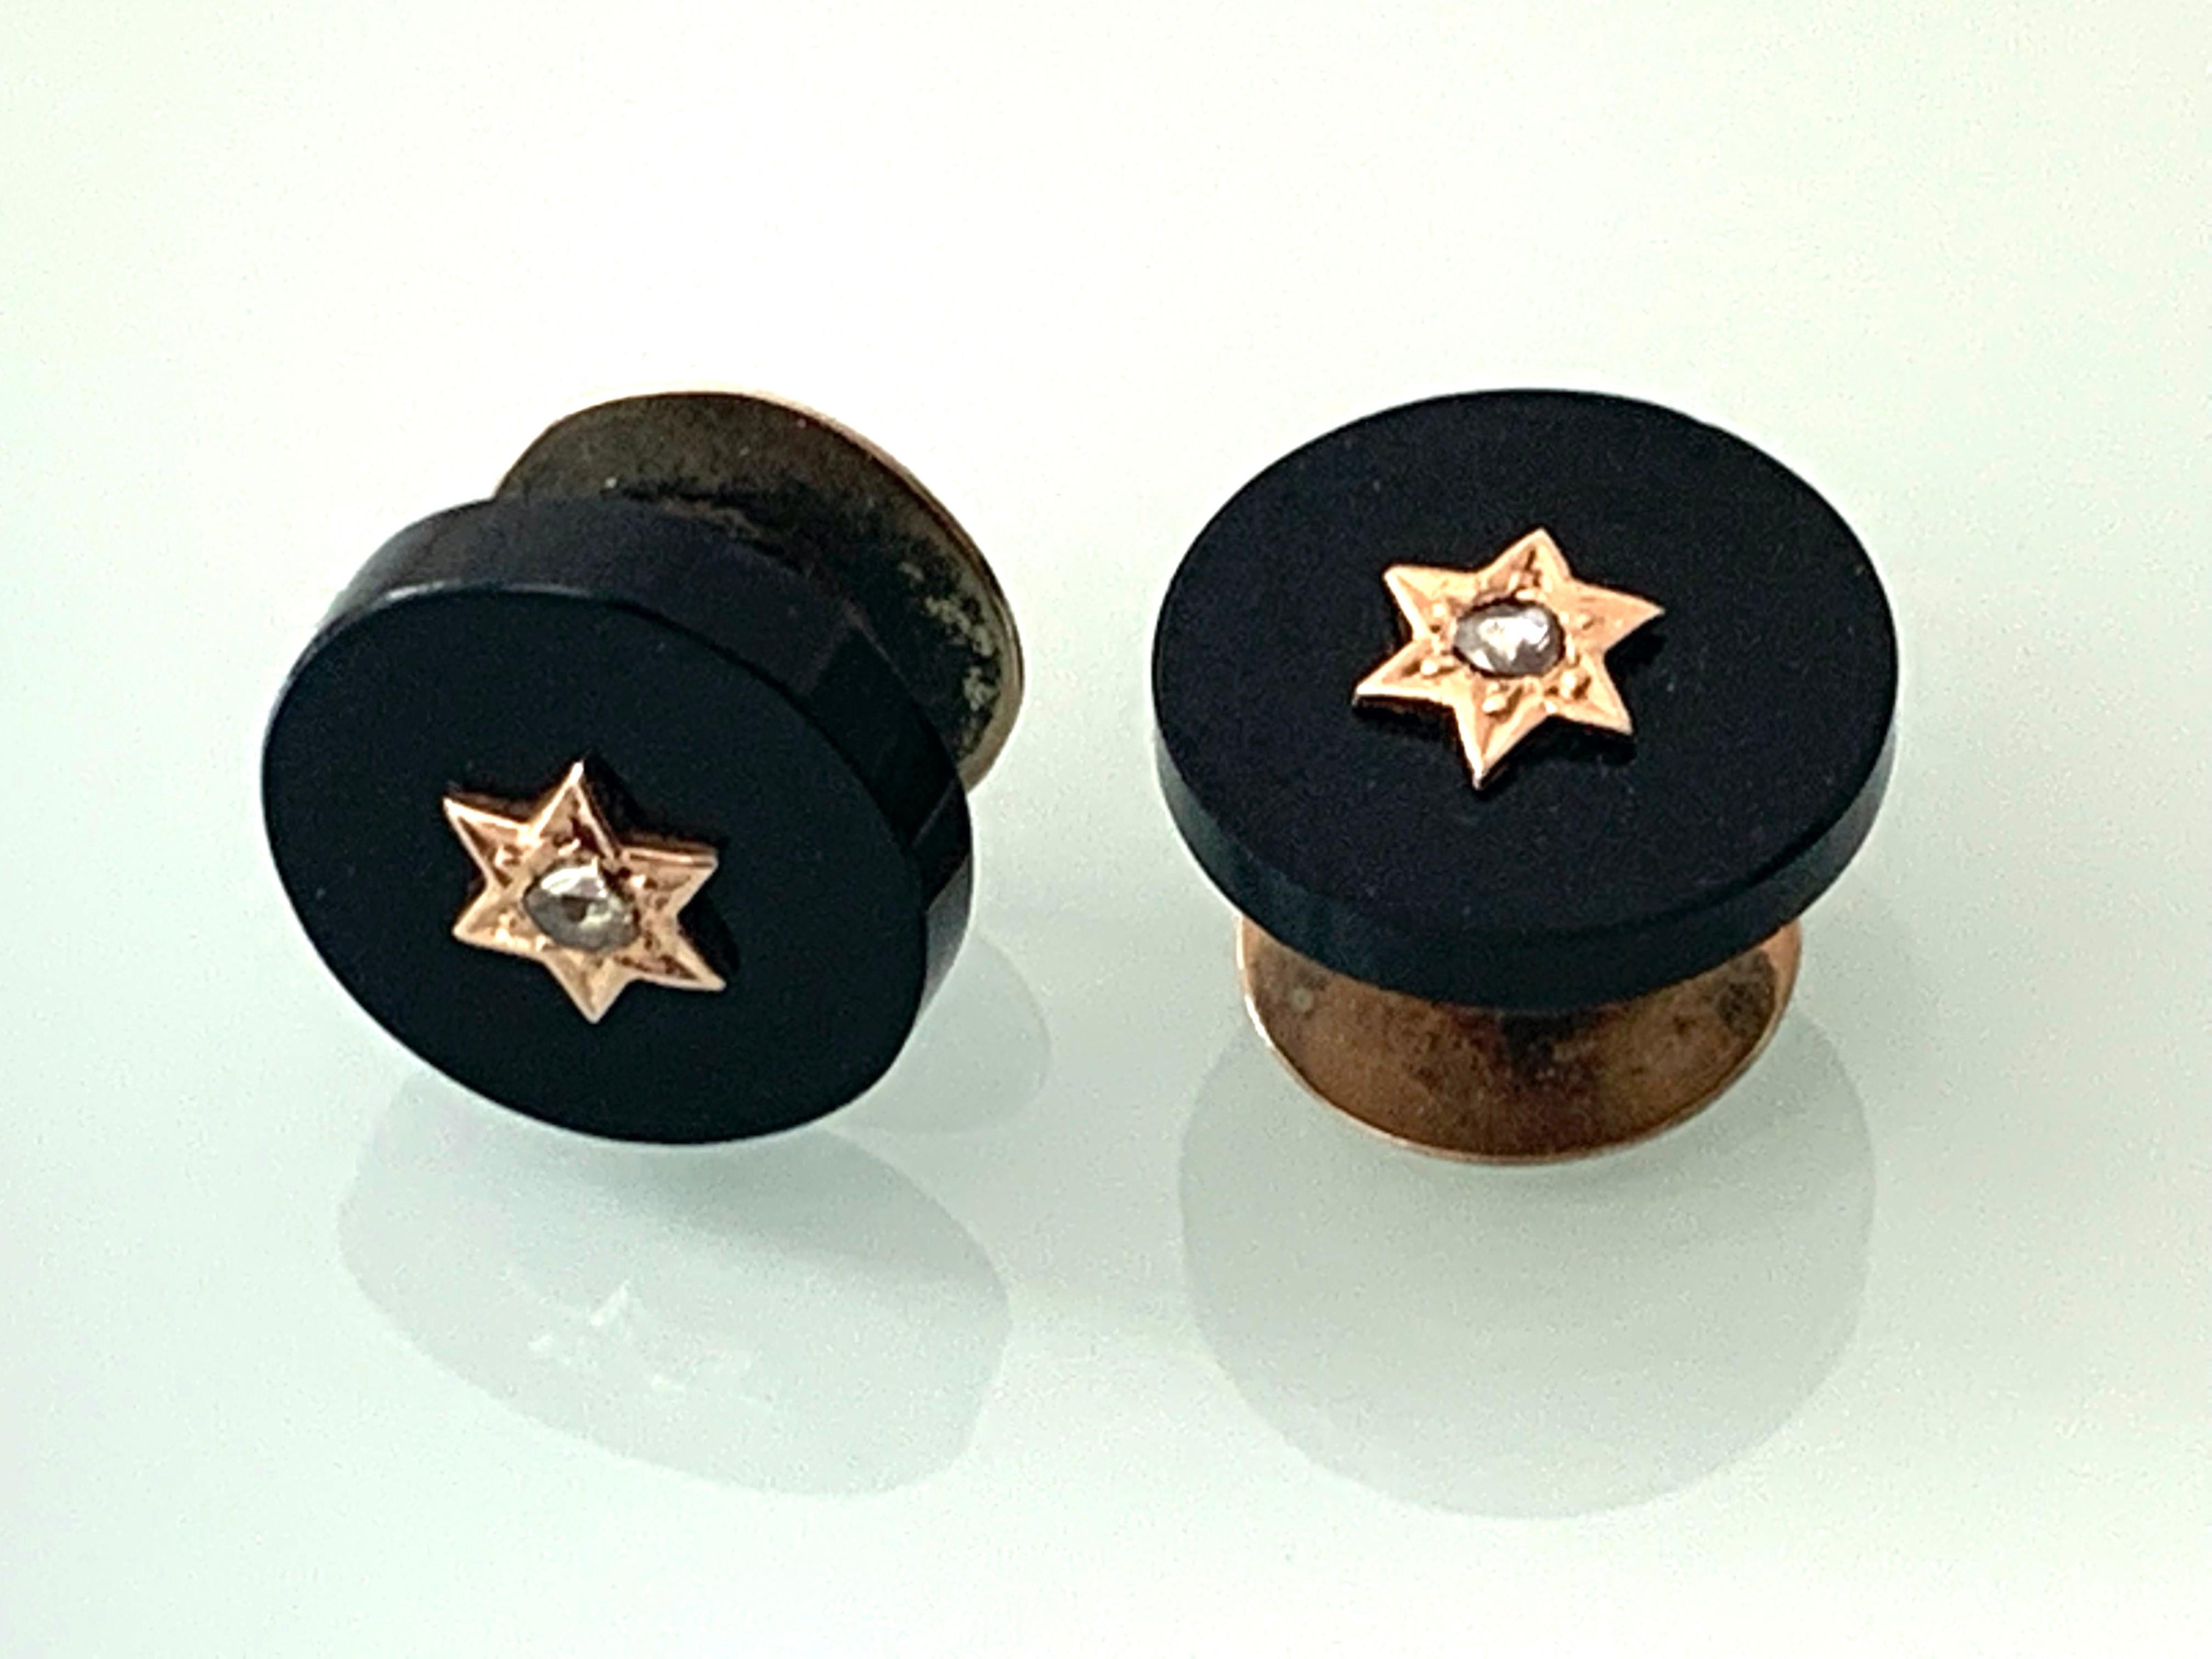 Beautiful Antique Black Onyx & Diamond Antique Shirt Button Hole Studs
with 9ct Gold backs
The diamonds are Natural and mine cut 
Diamond Size approx 2.5mm x 2.5mm
set with 9ct gold stars
Slight damage to one please see read condition